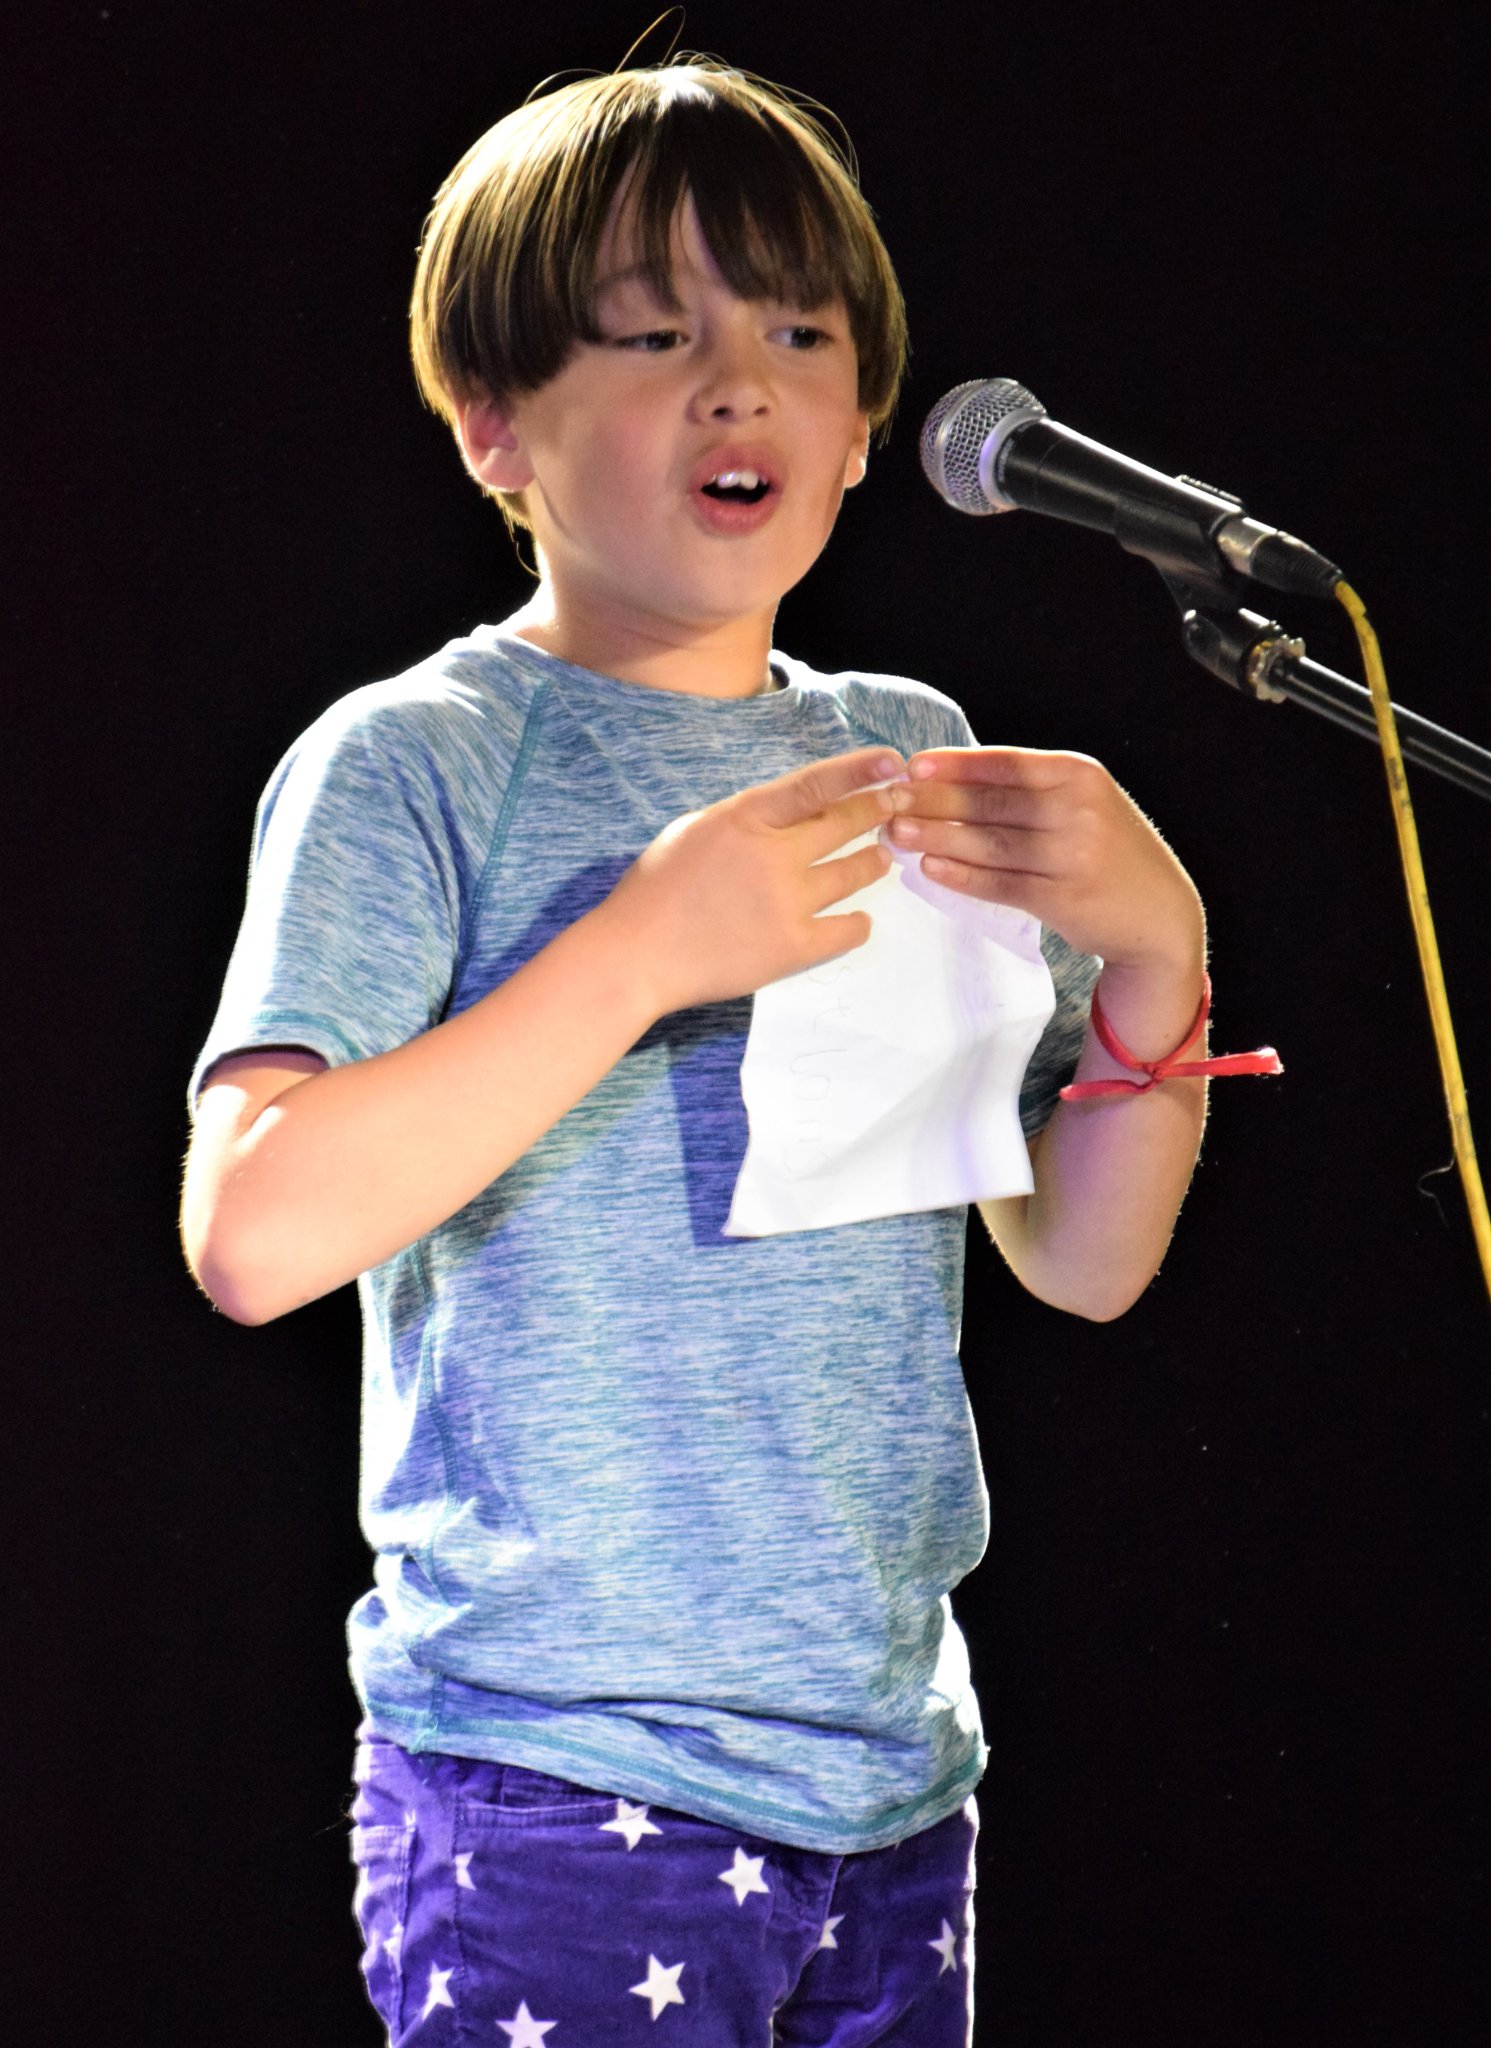 Photo of a young person standing on stage in front of a microphone